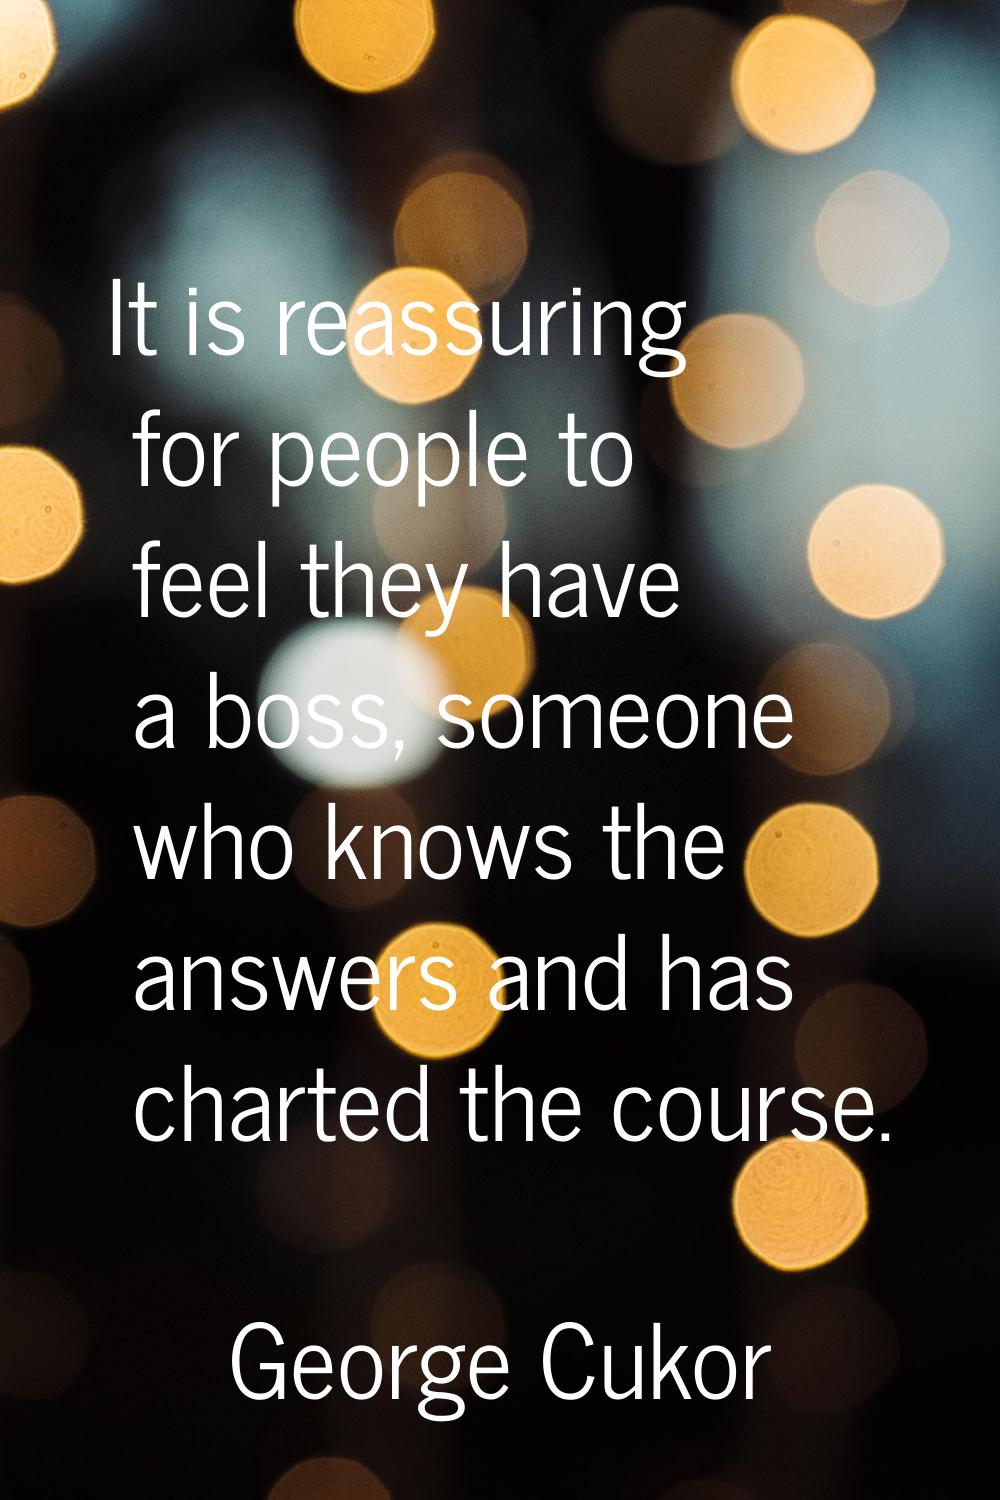 It is reassuring for people to feel they have a boss, someone who knows the answers and has charted